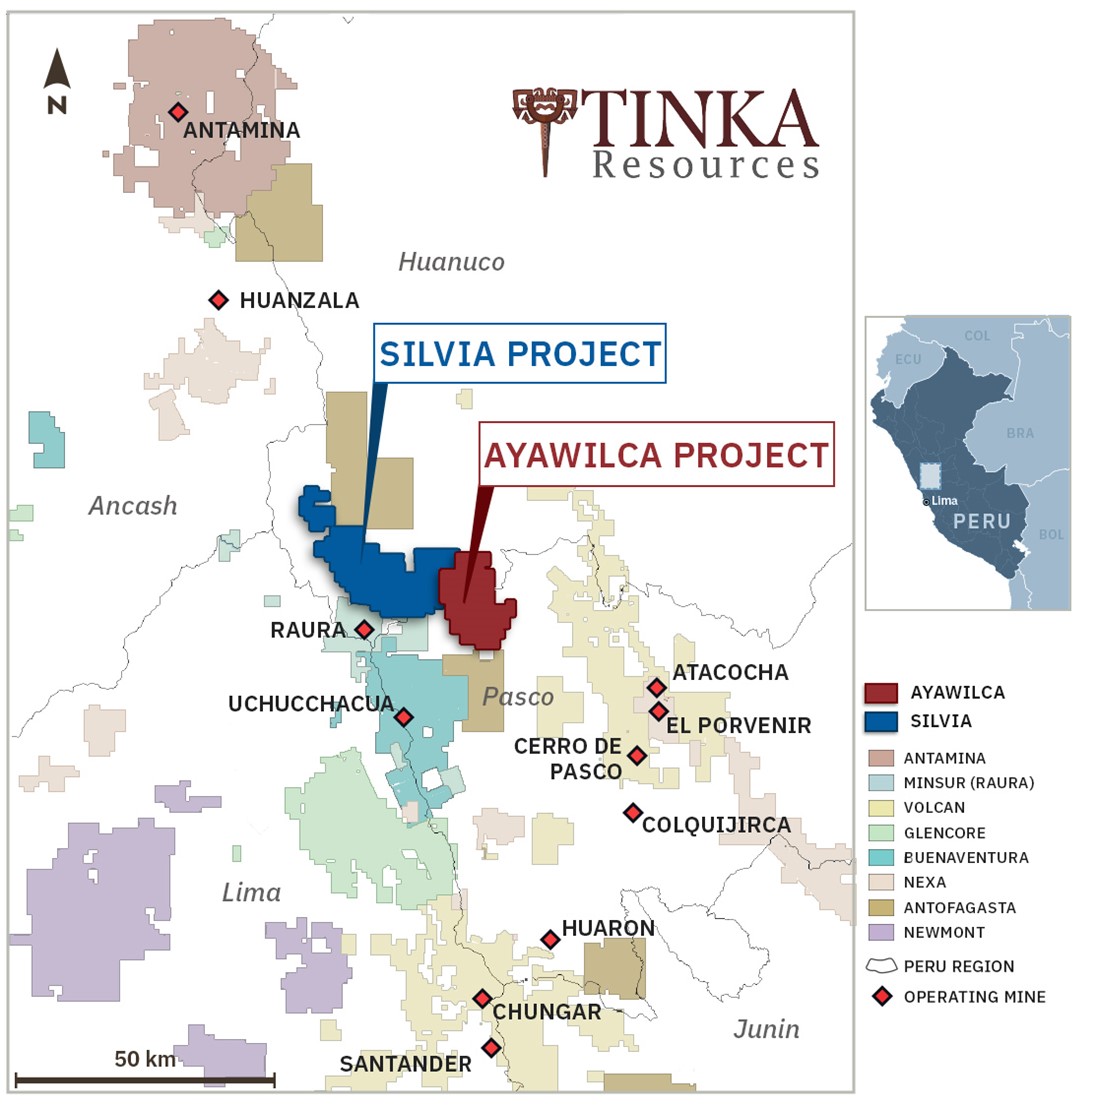 Tinka Resources Ltd., Monday, July 12, 2021, Press release picture